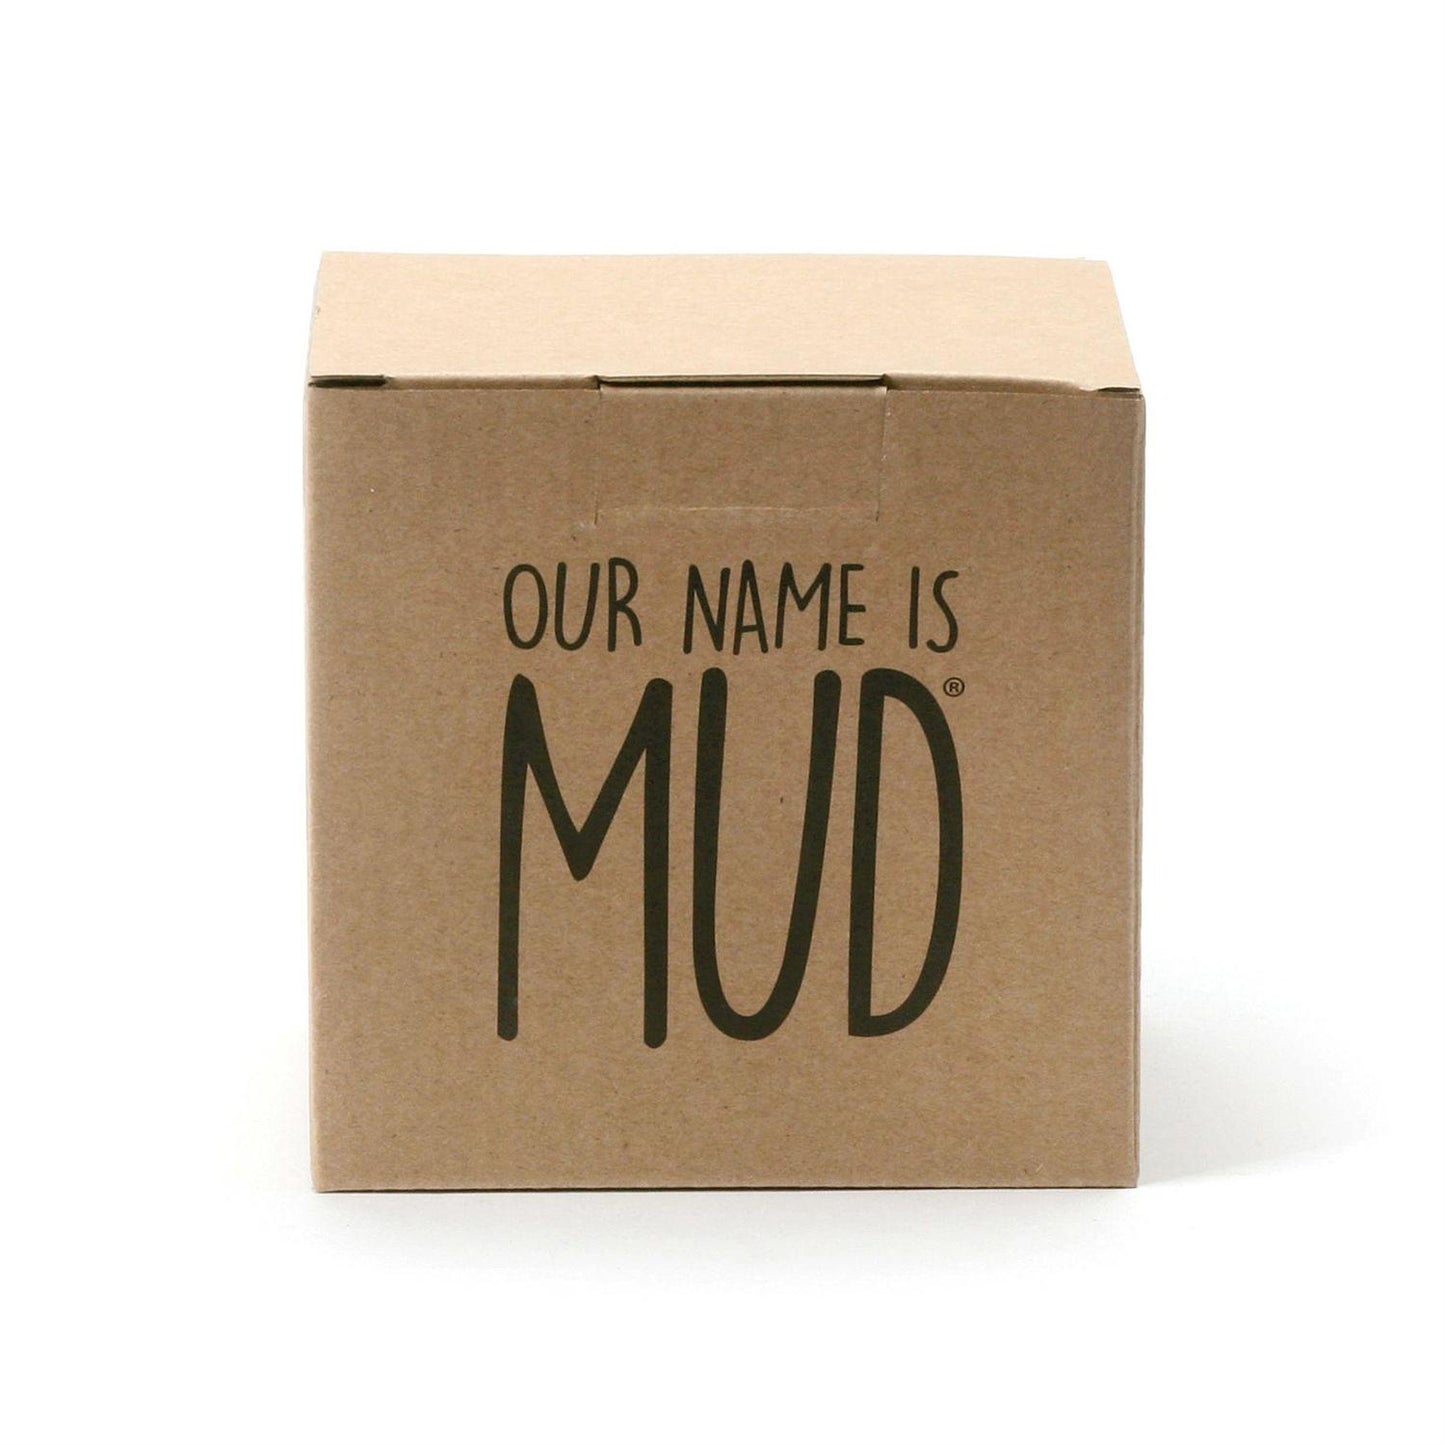 Enesco Our Name Is Mud RETIRED MEMORY BOX